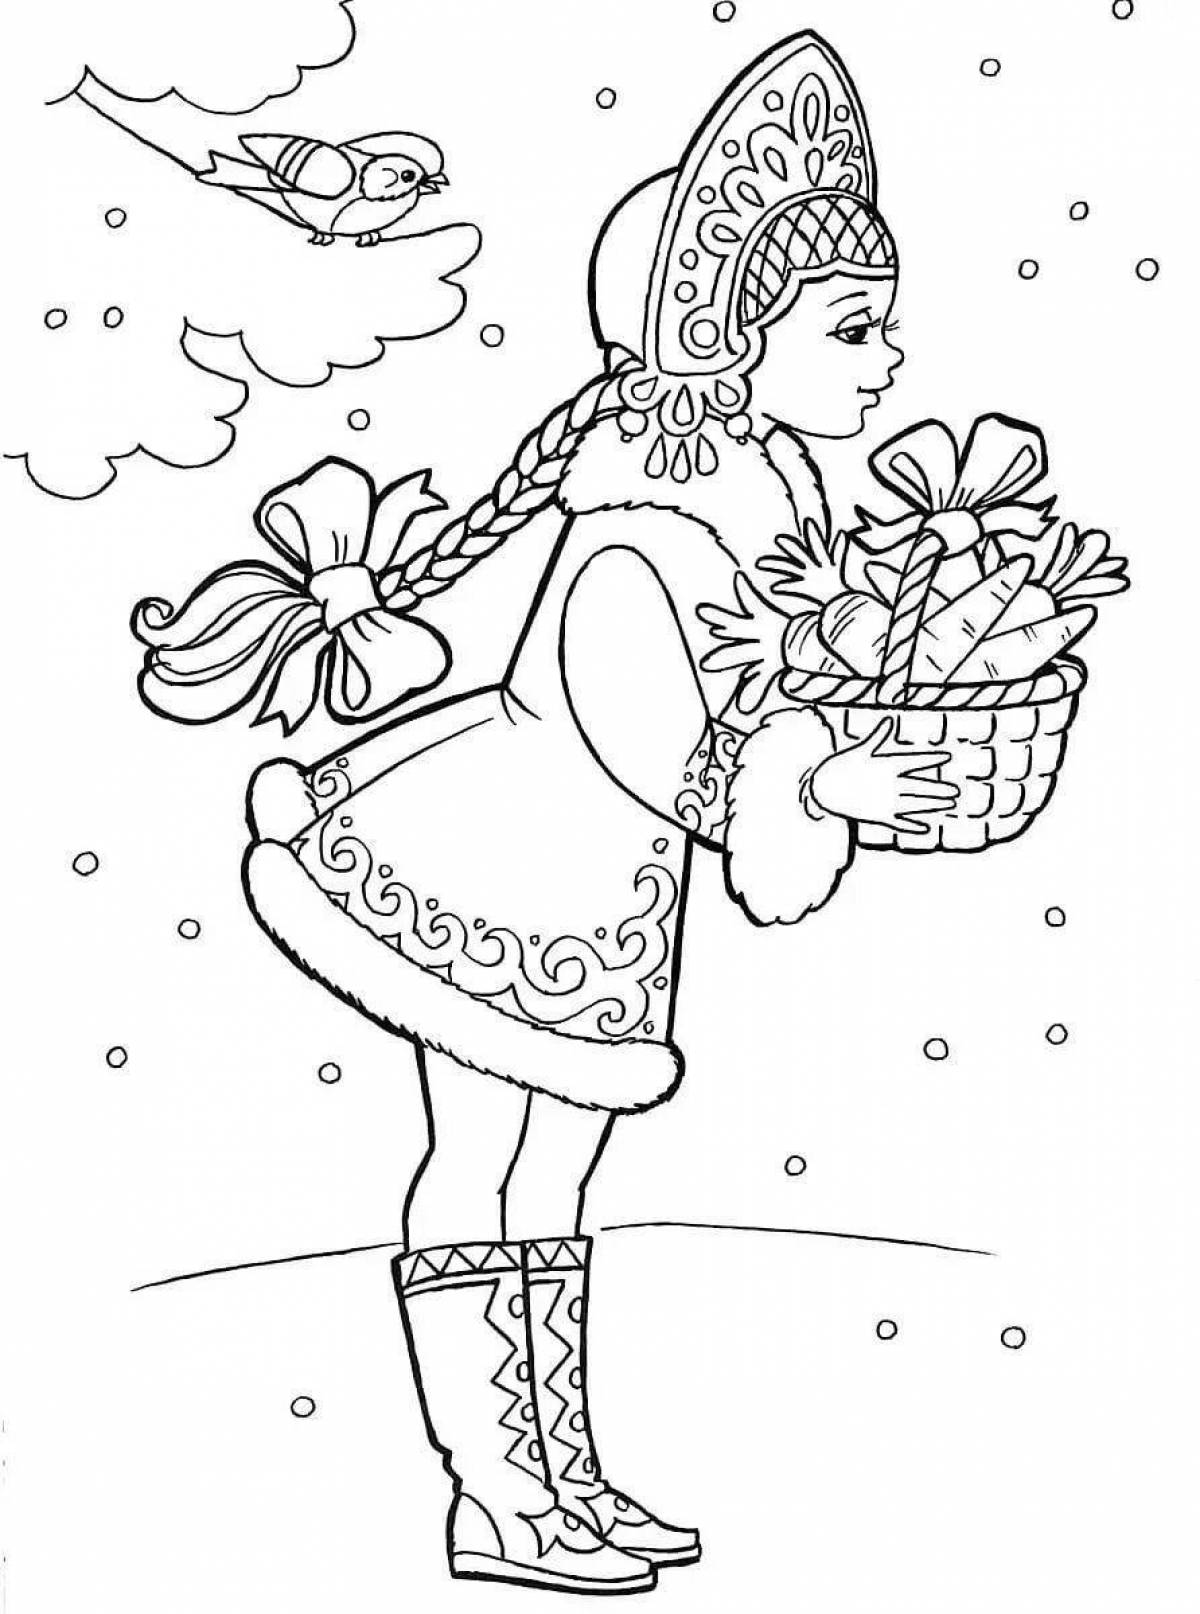 Delightful Snow Maiden with a Christmas tree